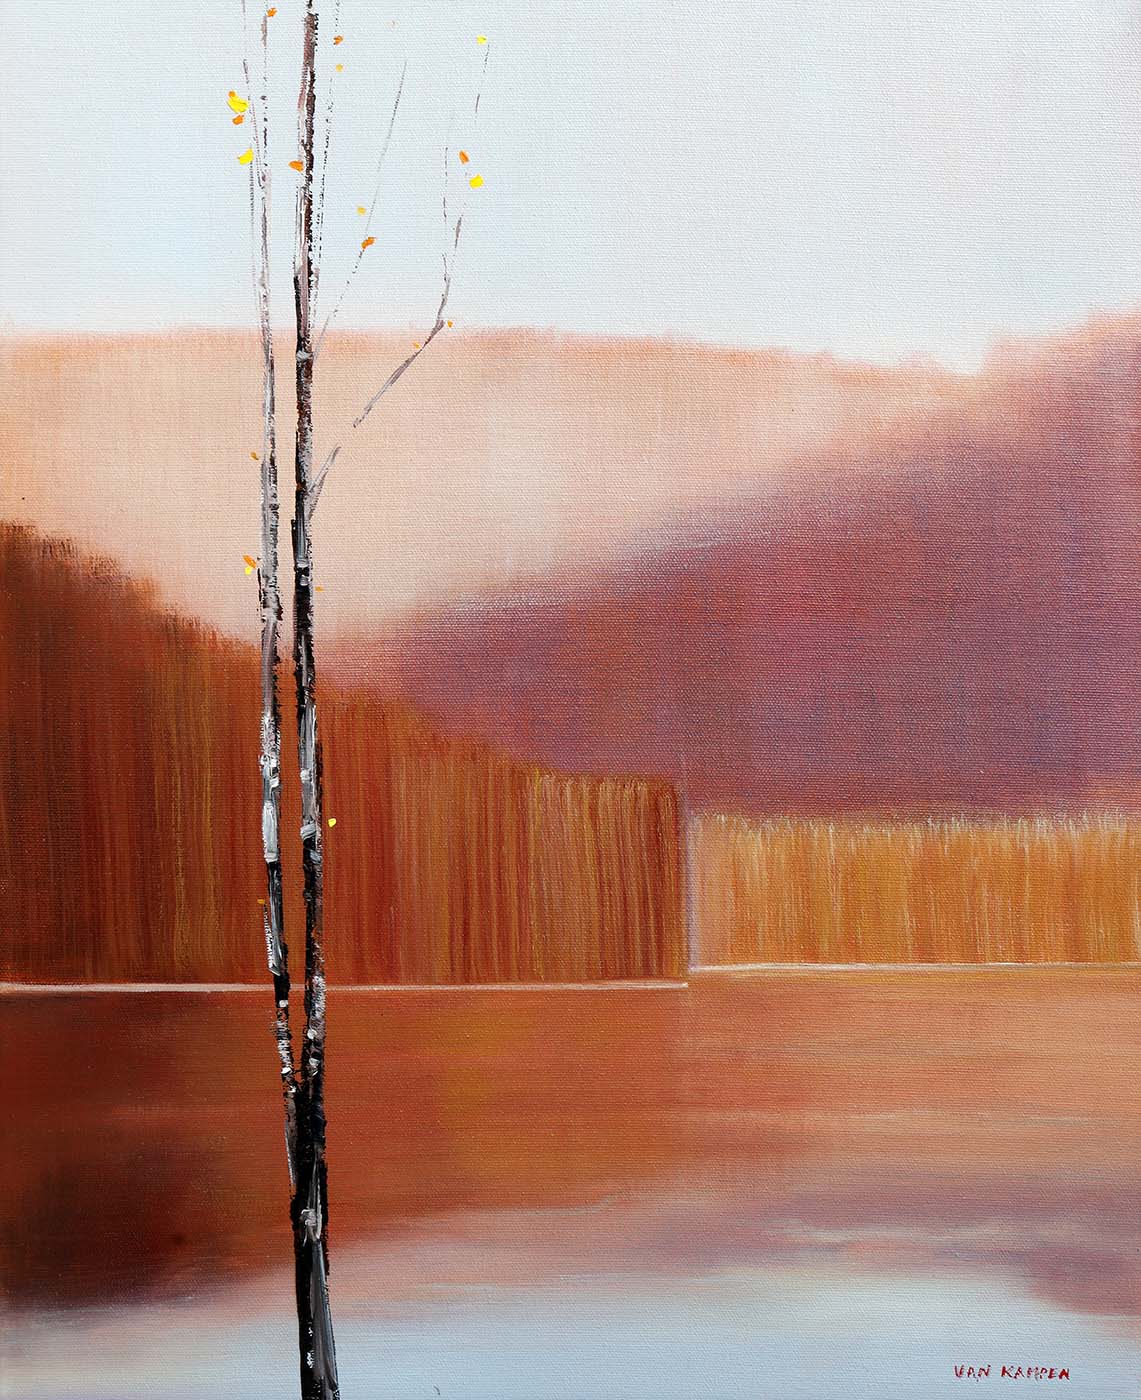 Contemporary art. Title: Tranquility, Oil on Canvas, 20x16 in by Canadian artist Katherine van Kampen.